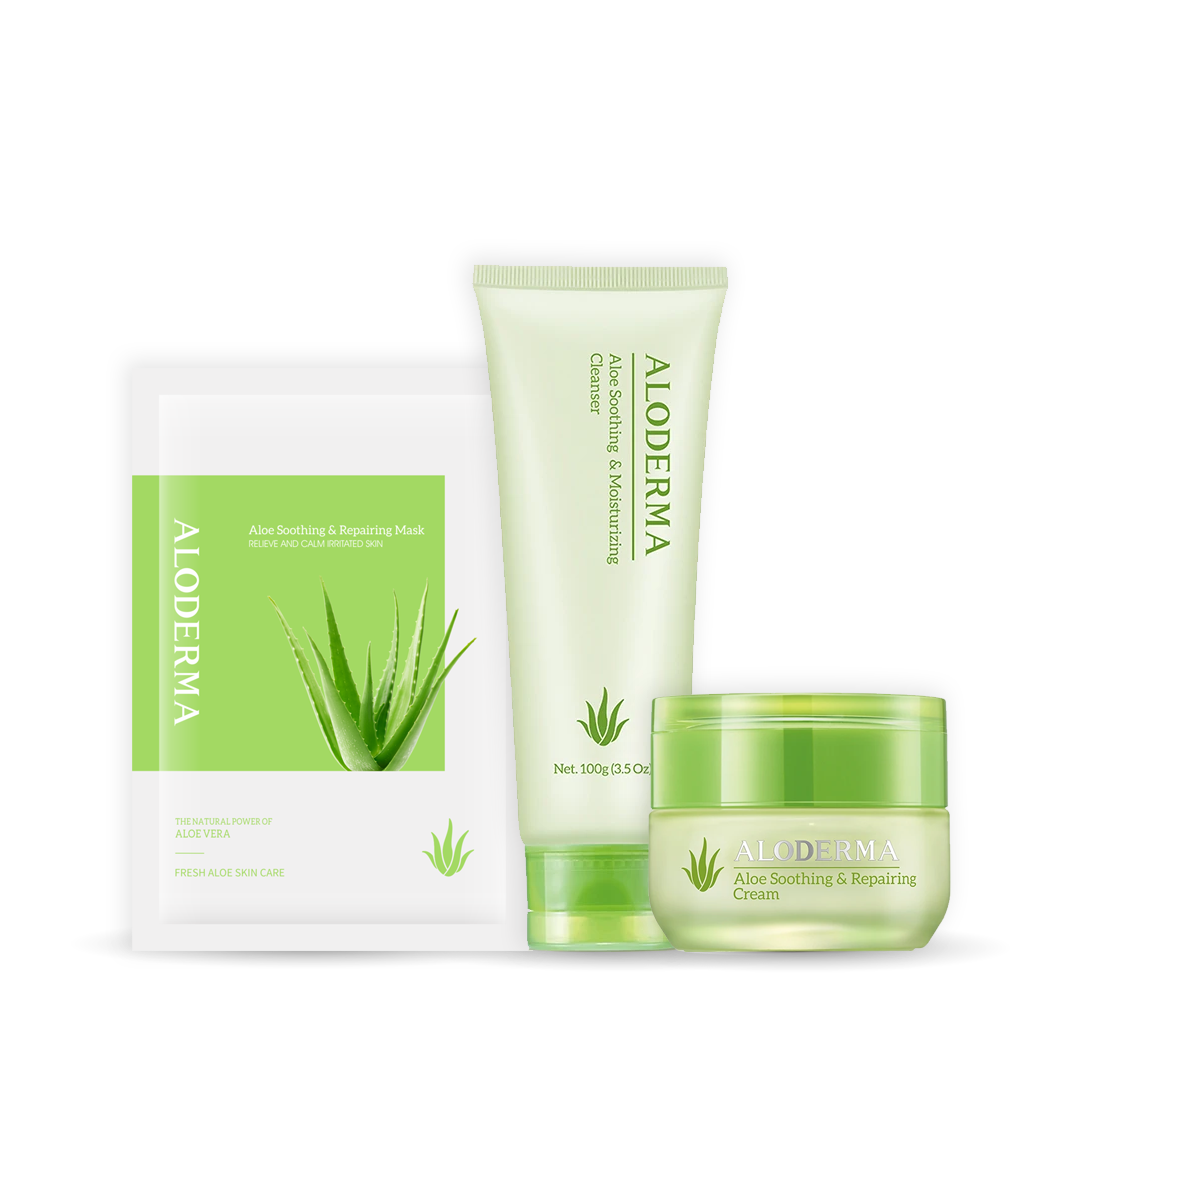 Pure Aloe Soothing Set by ALODERMA